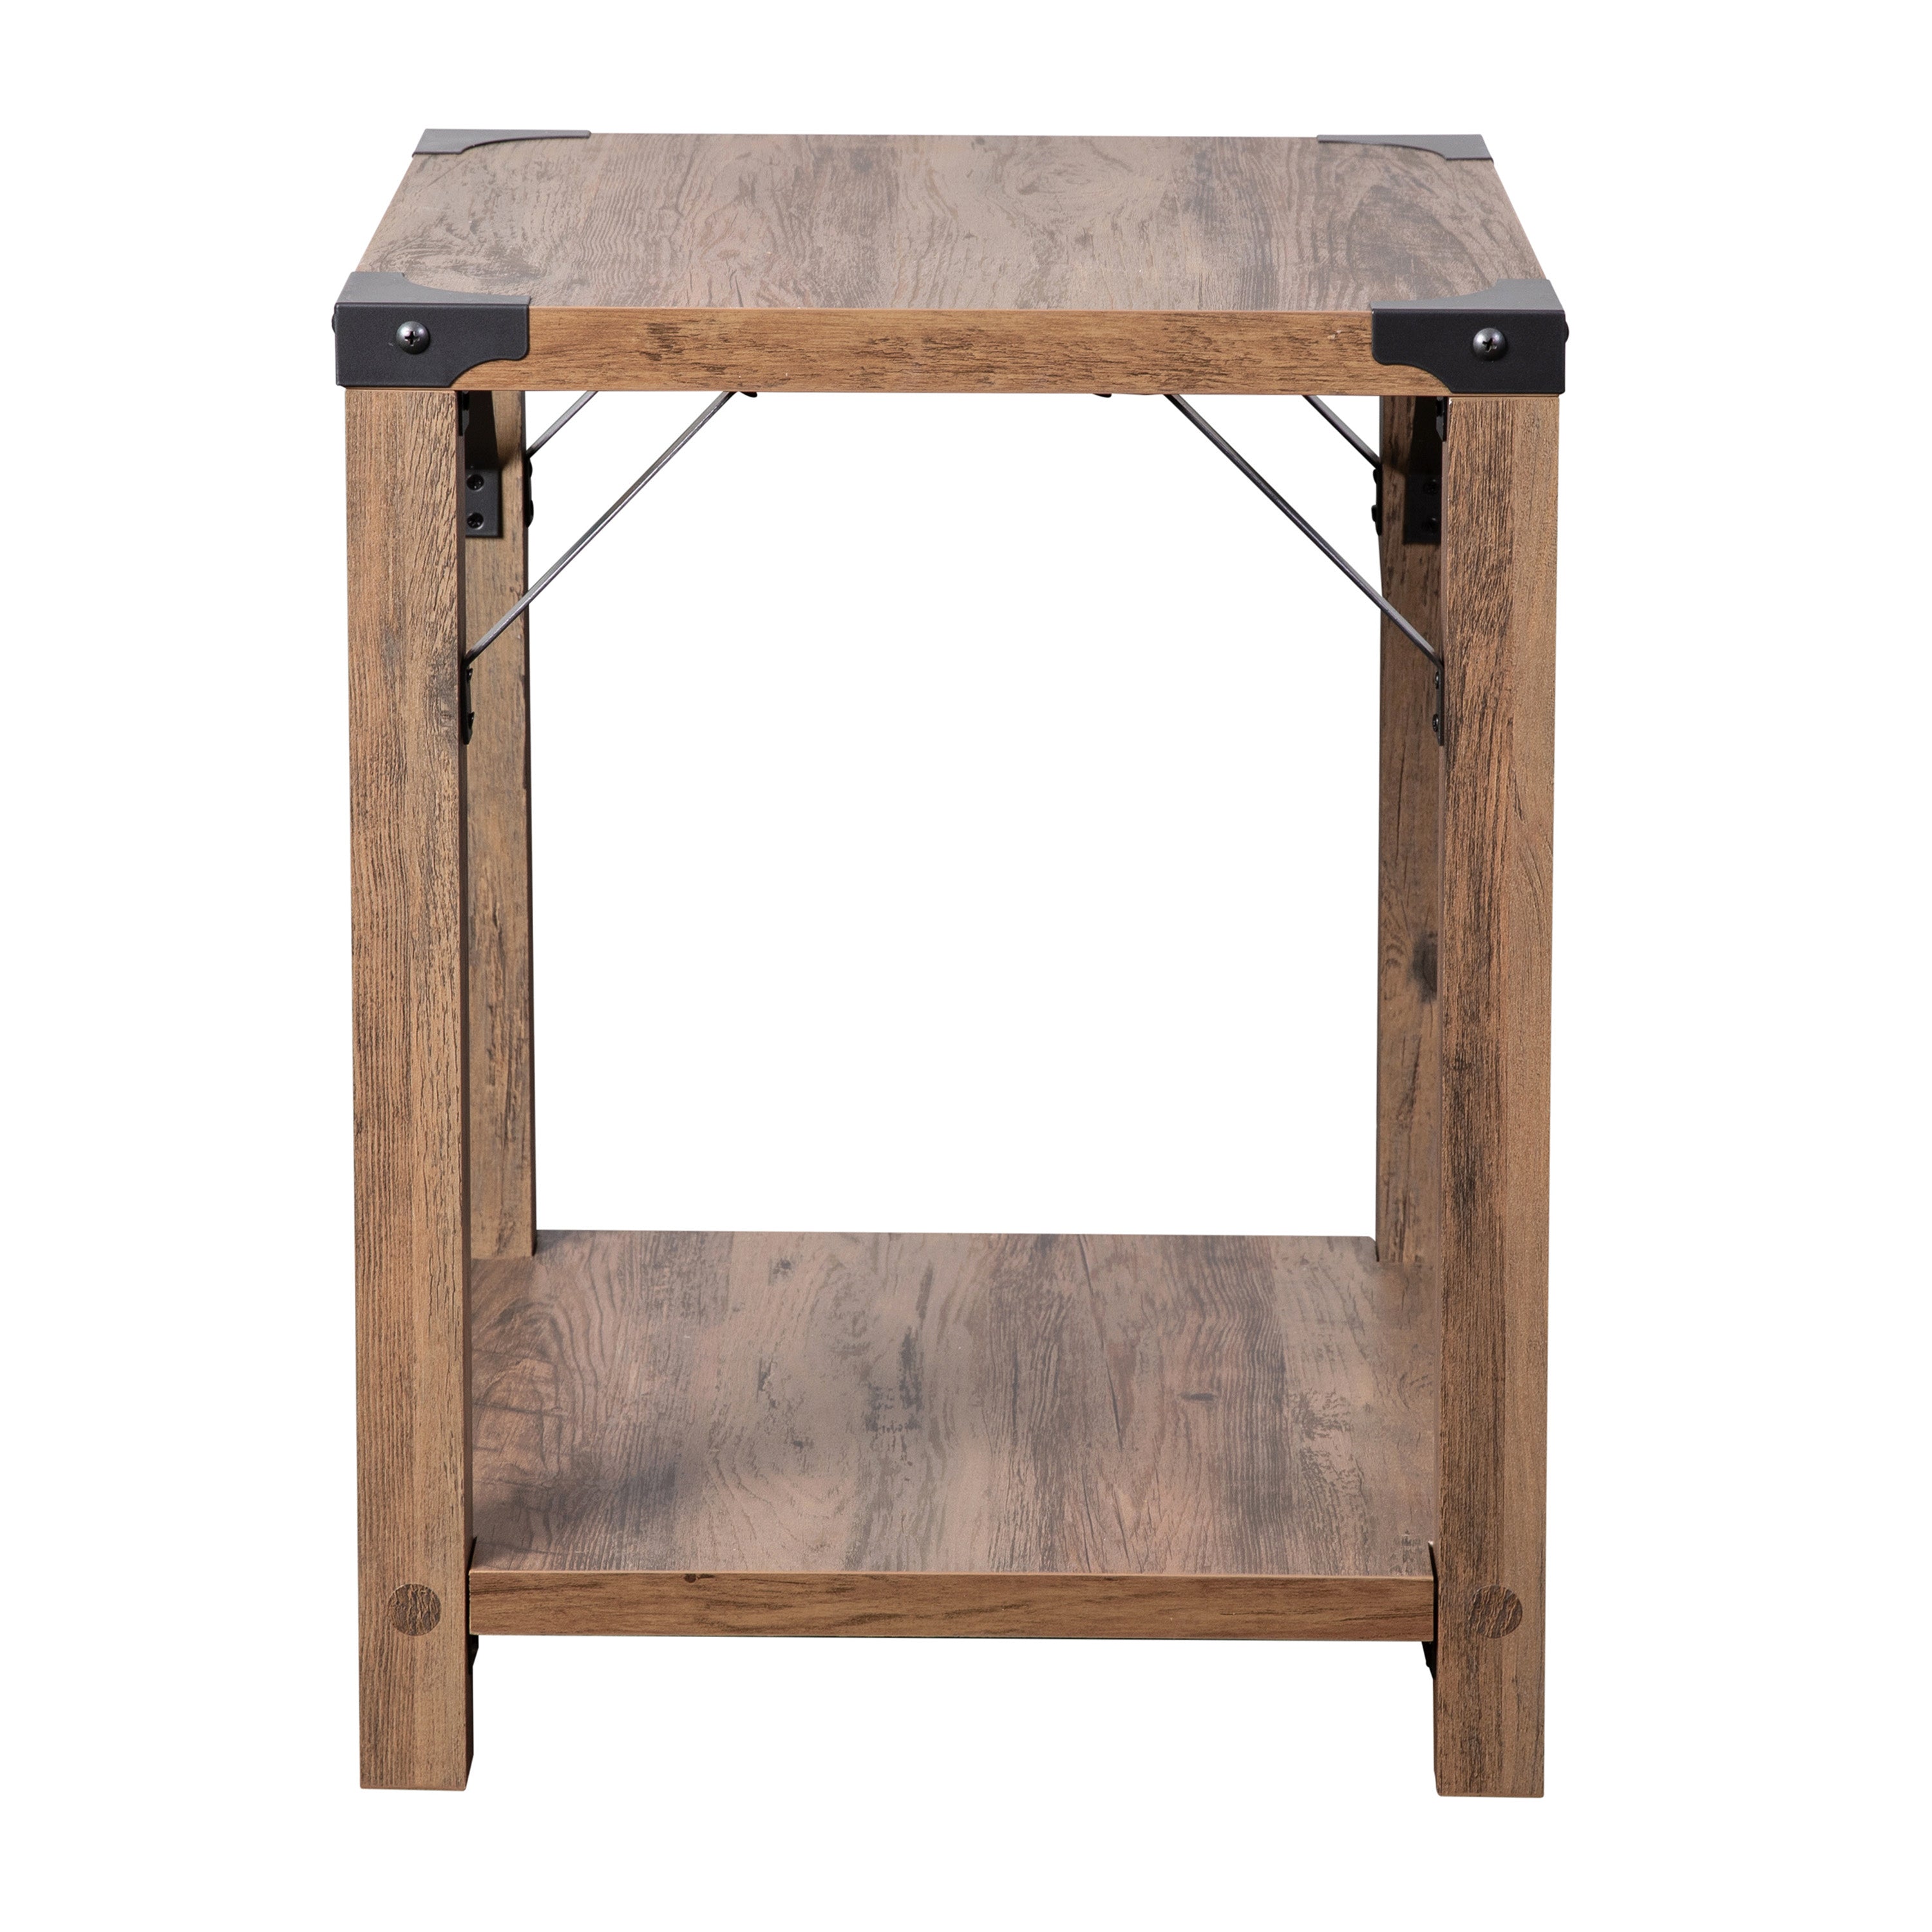 Wyatt Modern Farmhouse Wooden 2 Tier End Table with Metal Corner Accents and Cross Bracing-End Table-Flash Furniture-Wall2Wall Furnishings